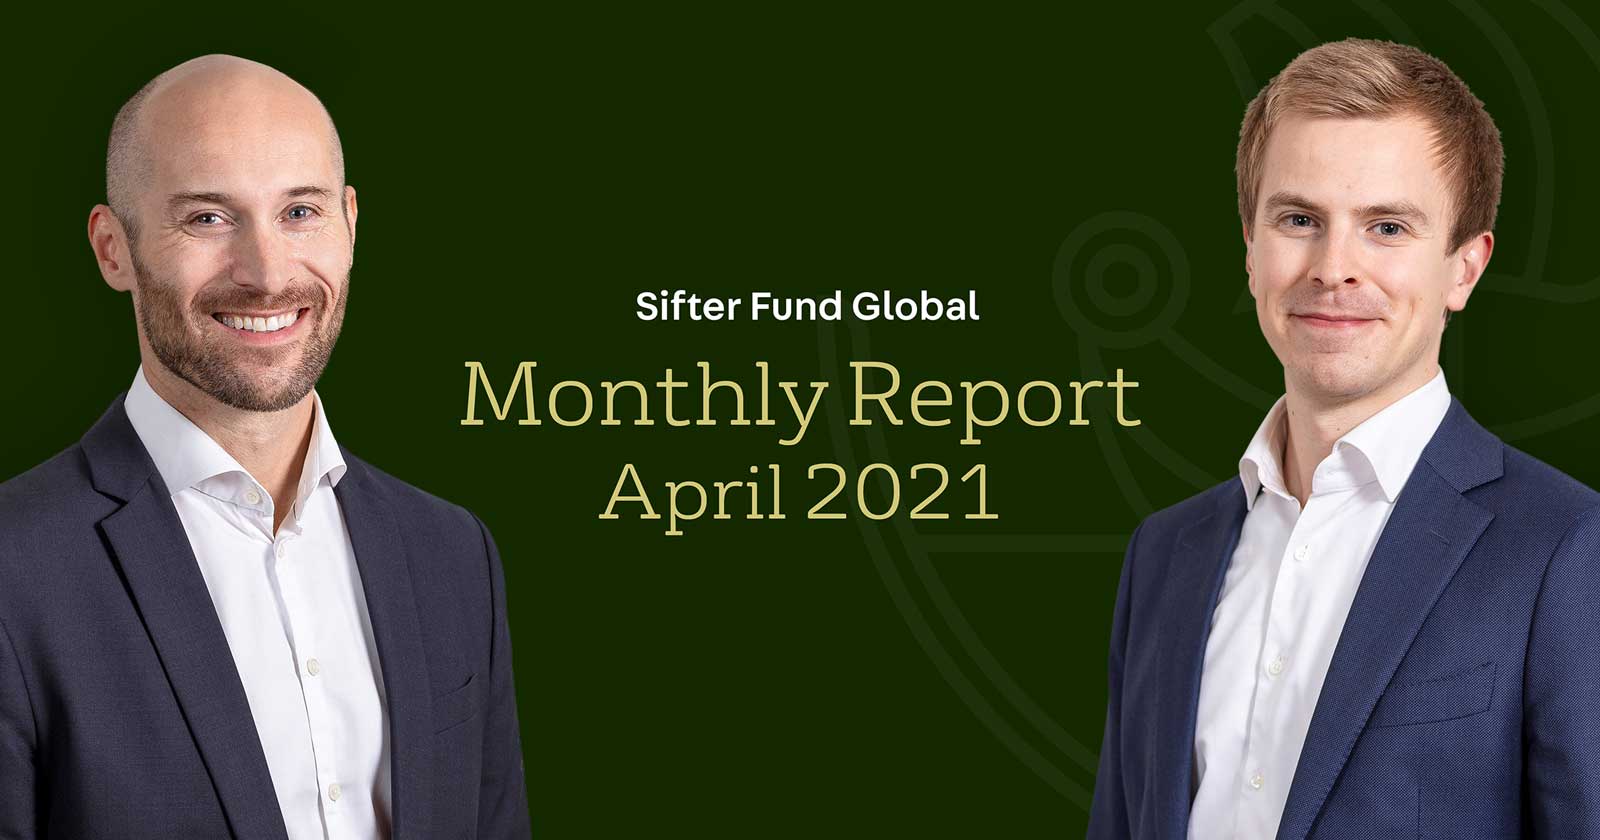 Sifter Fund Global Monthly Report April 2021 Video